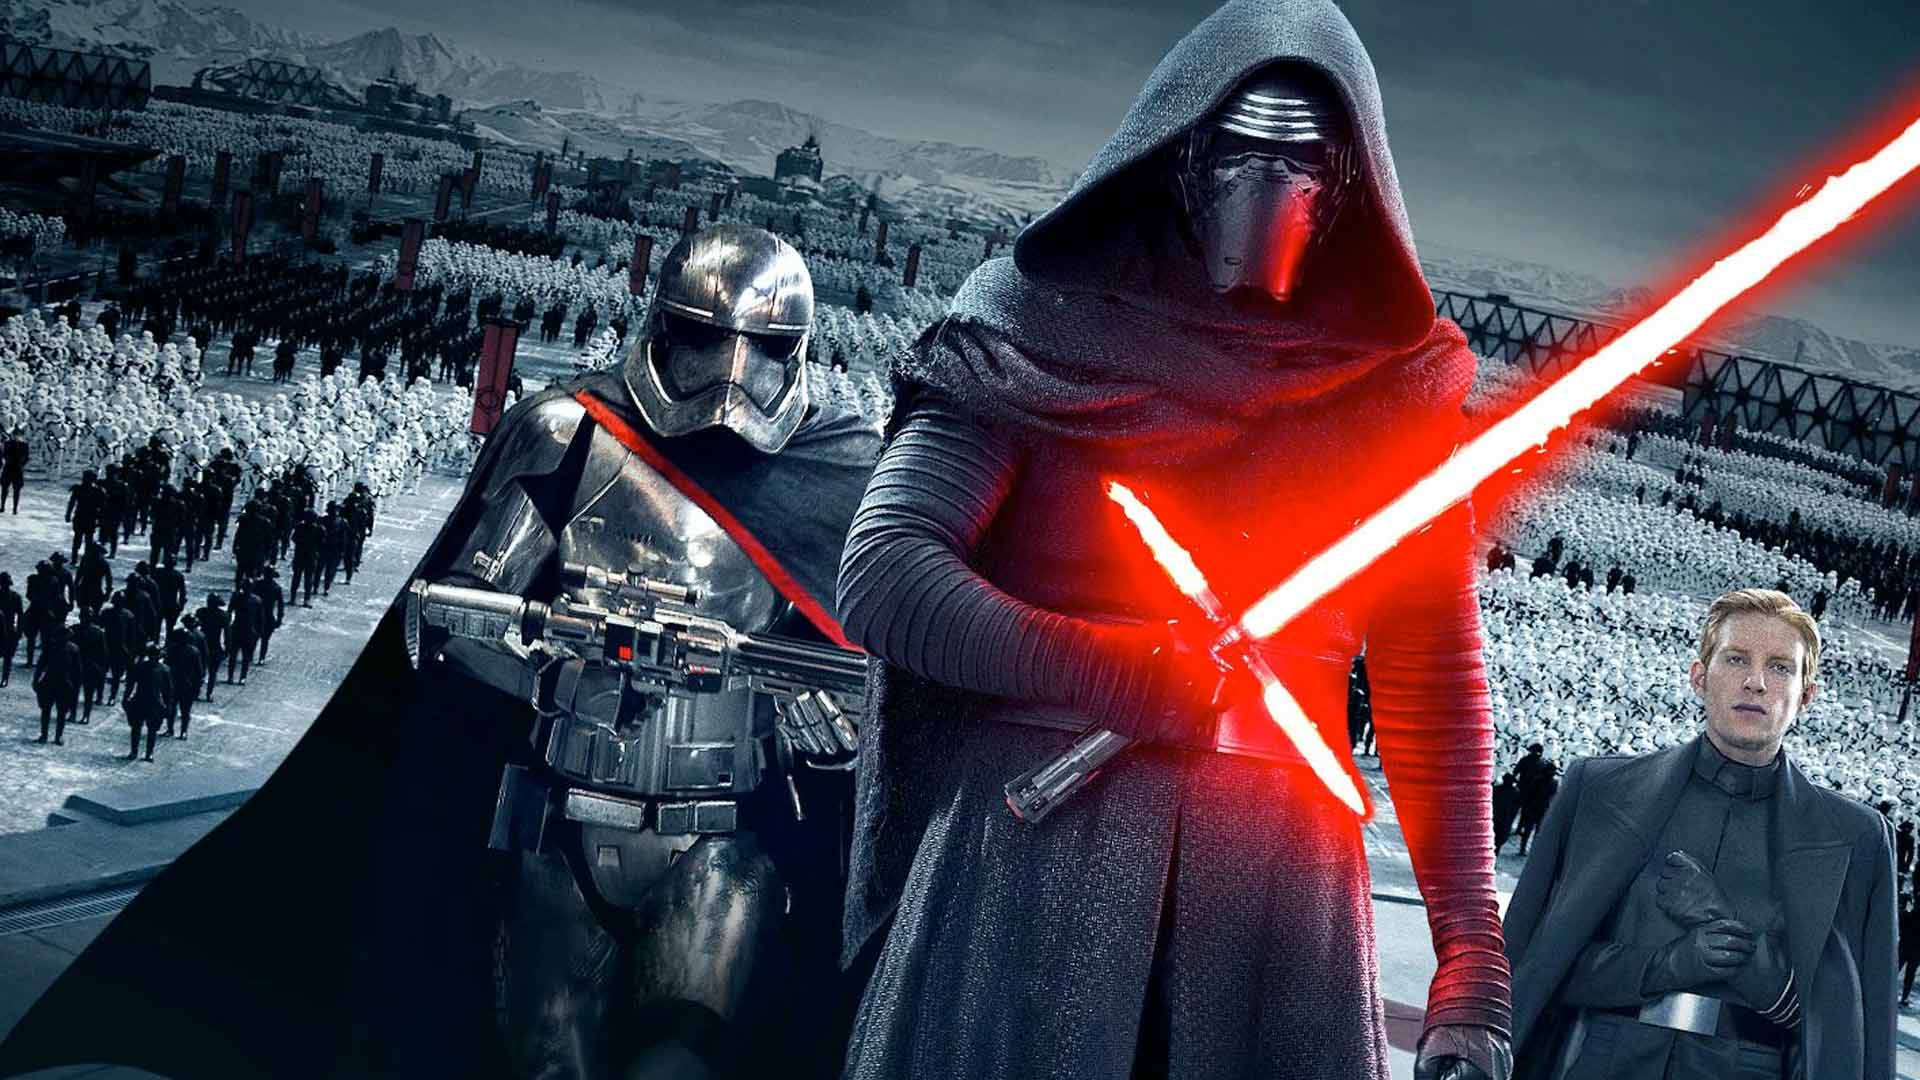 All Star Wars Movies, Ranked From Worst to Best